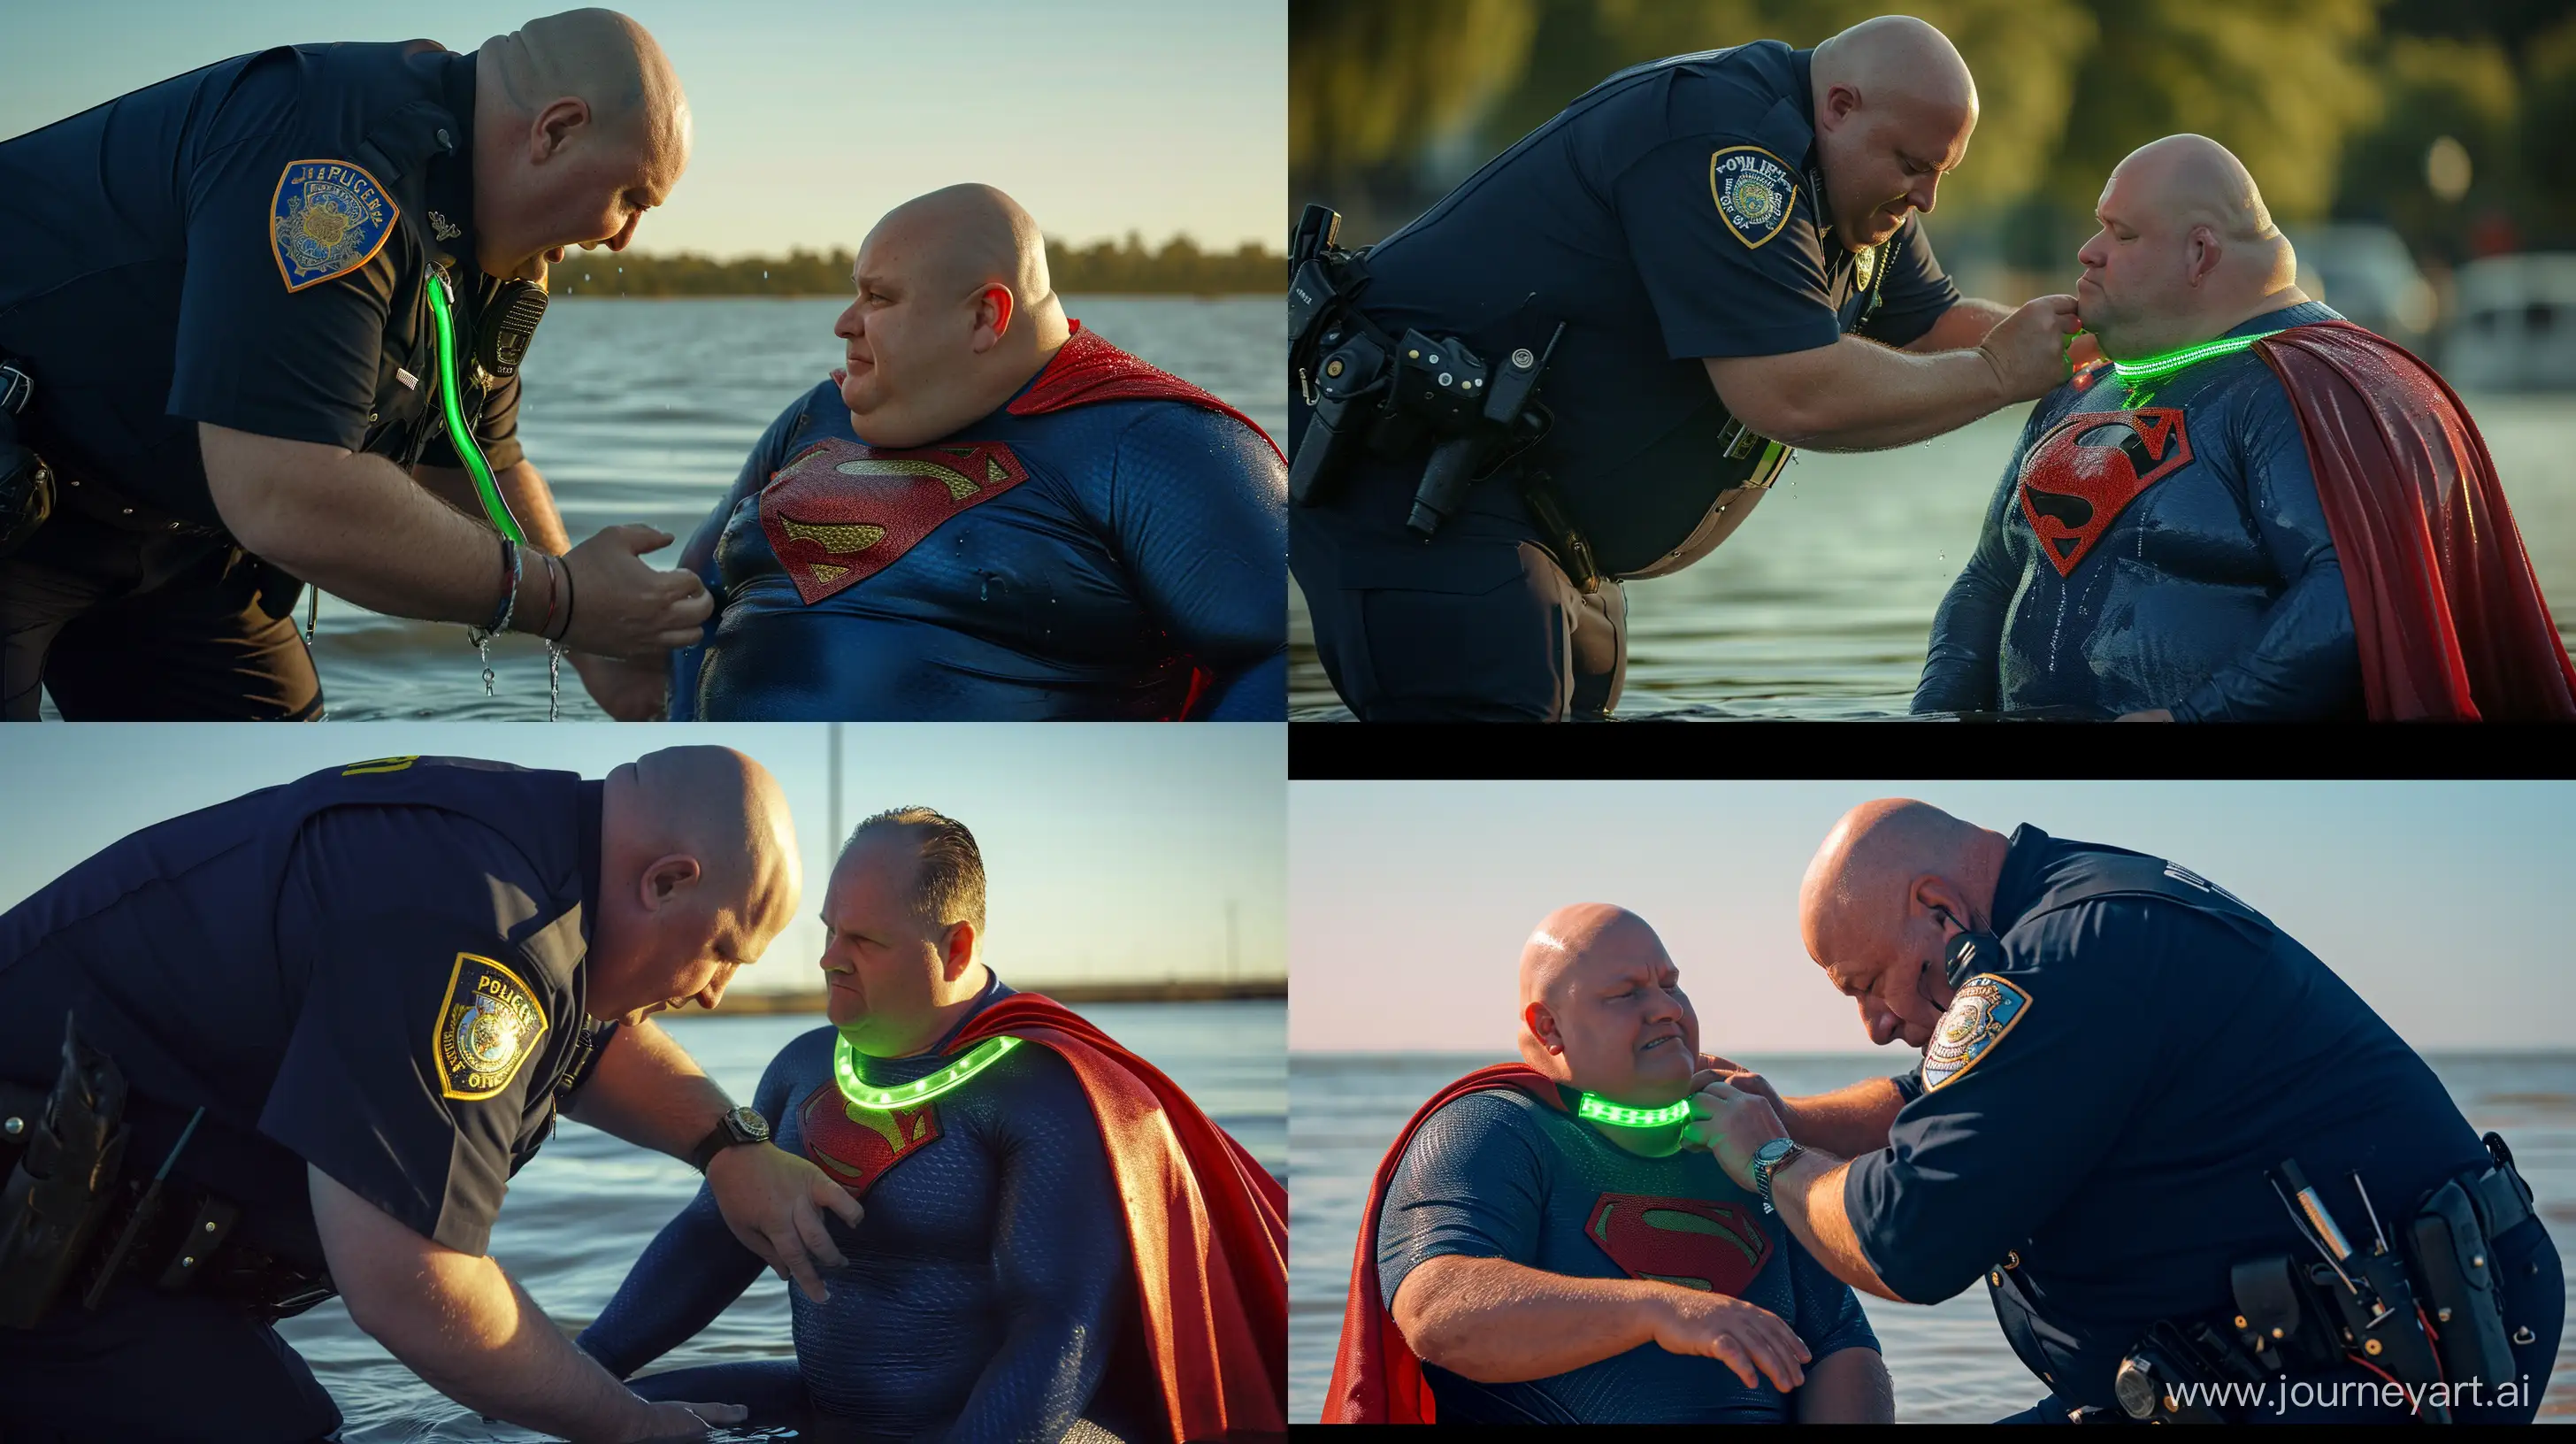 Elderly-Mens-Playful-Water-Scene-Silky-Navy-Blue-Police-Uniform-and-Glowing-Superman-Costume